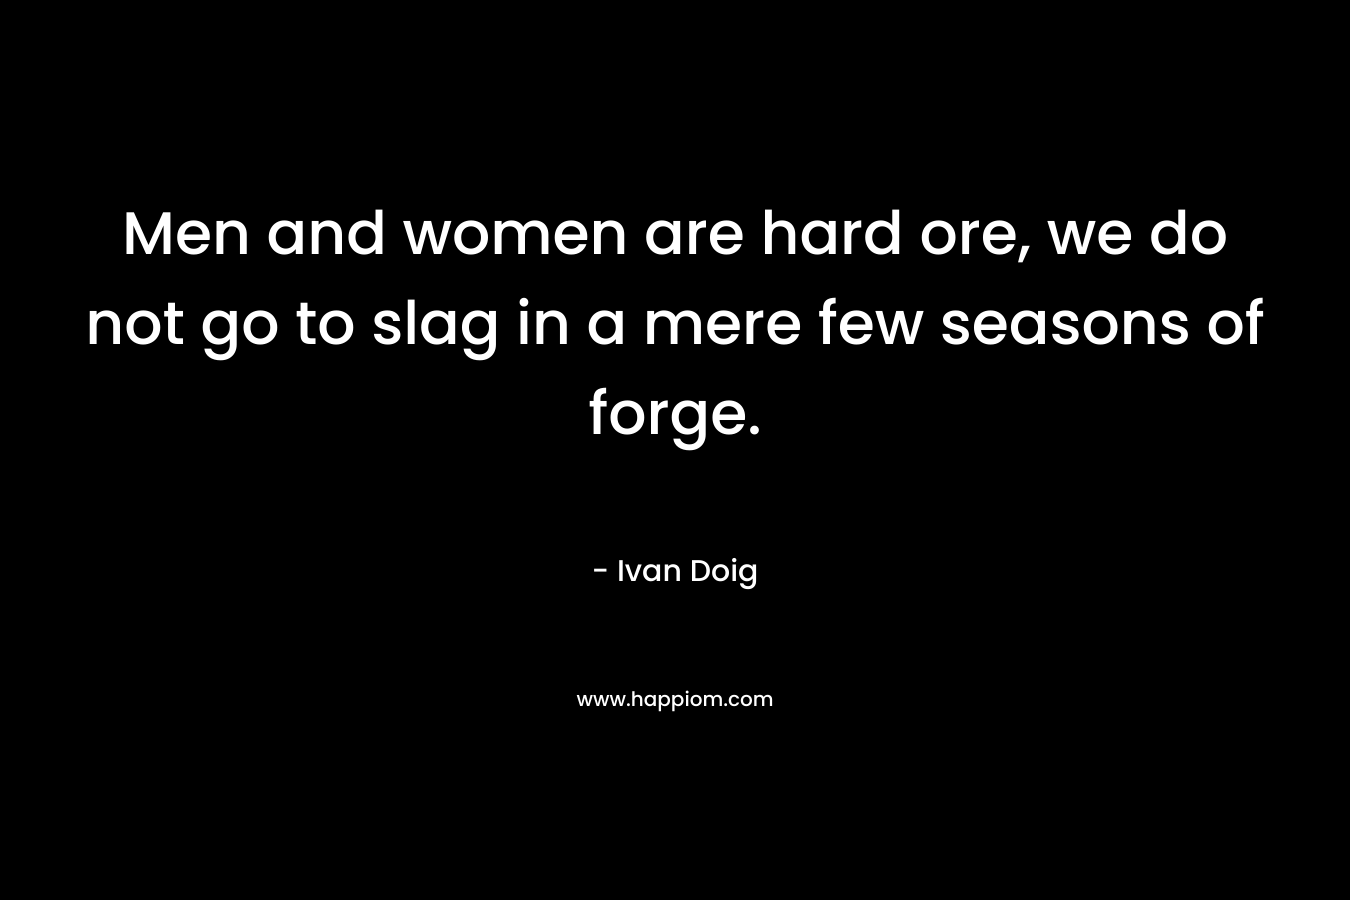 Men and women are hard ore, we do not go to slag in a mere few seasons of forge.